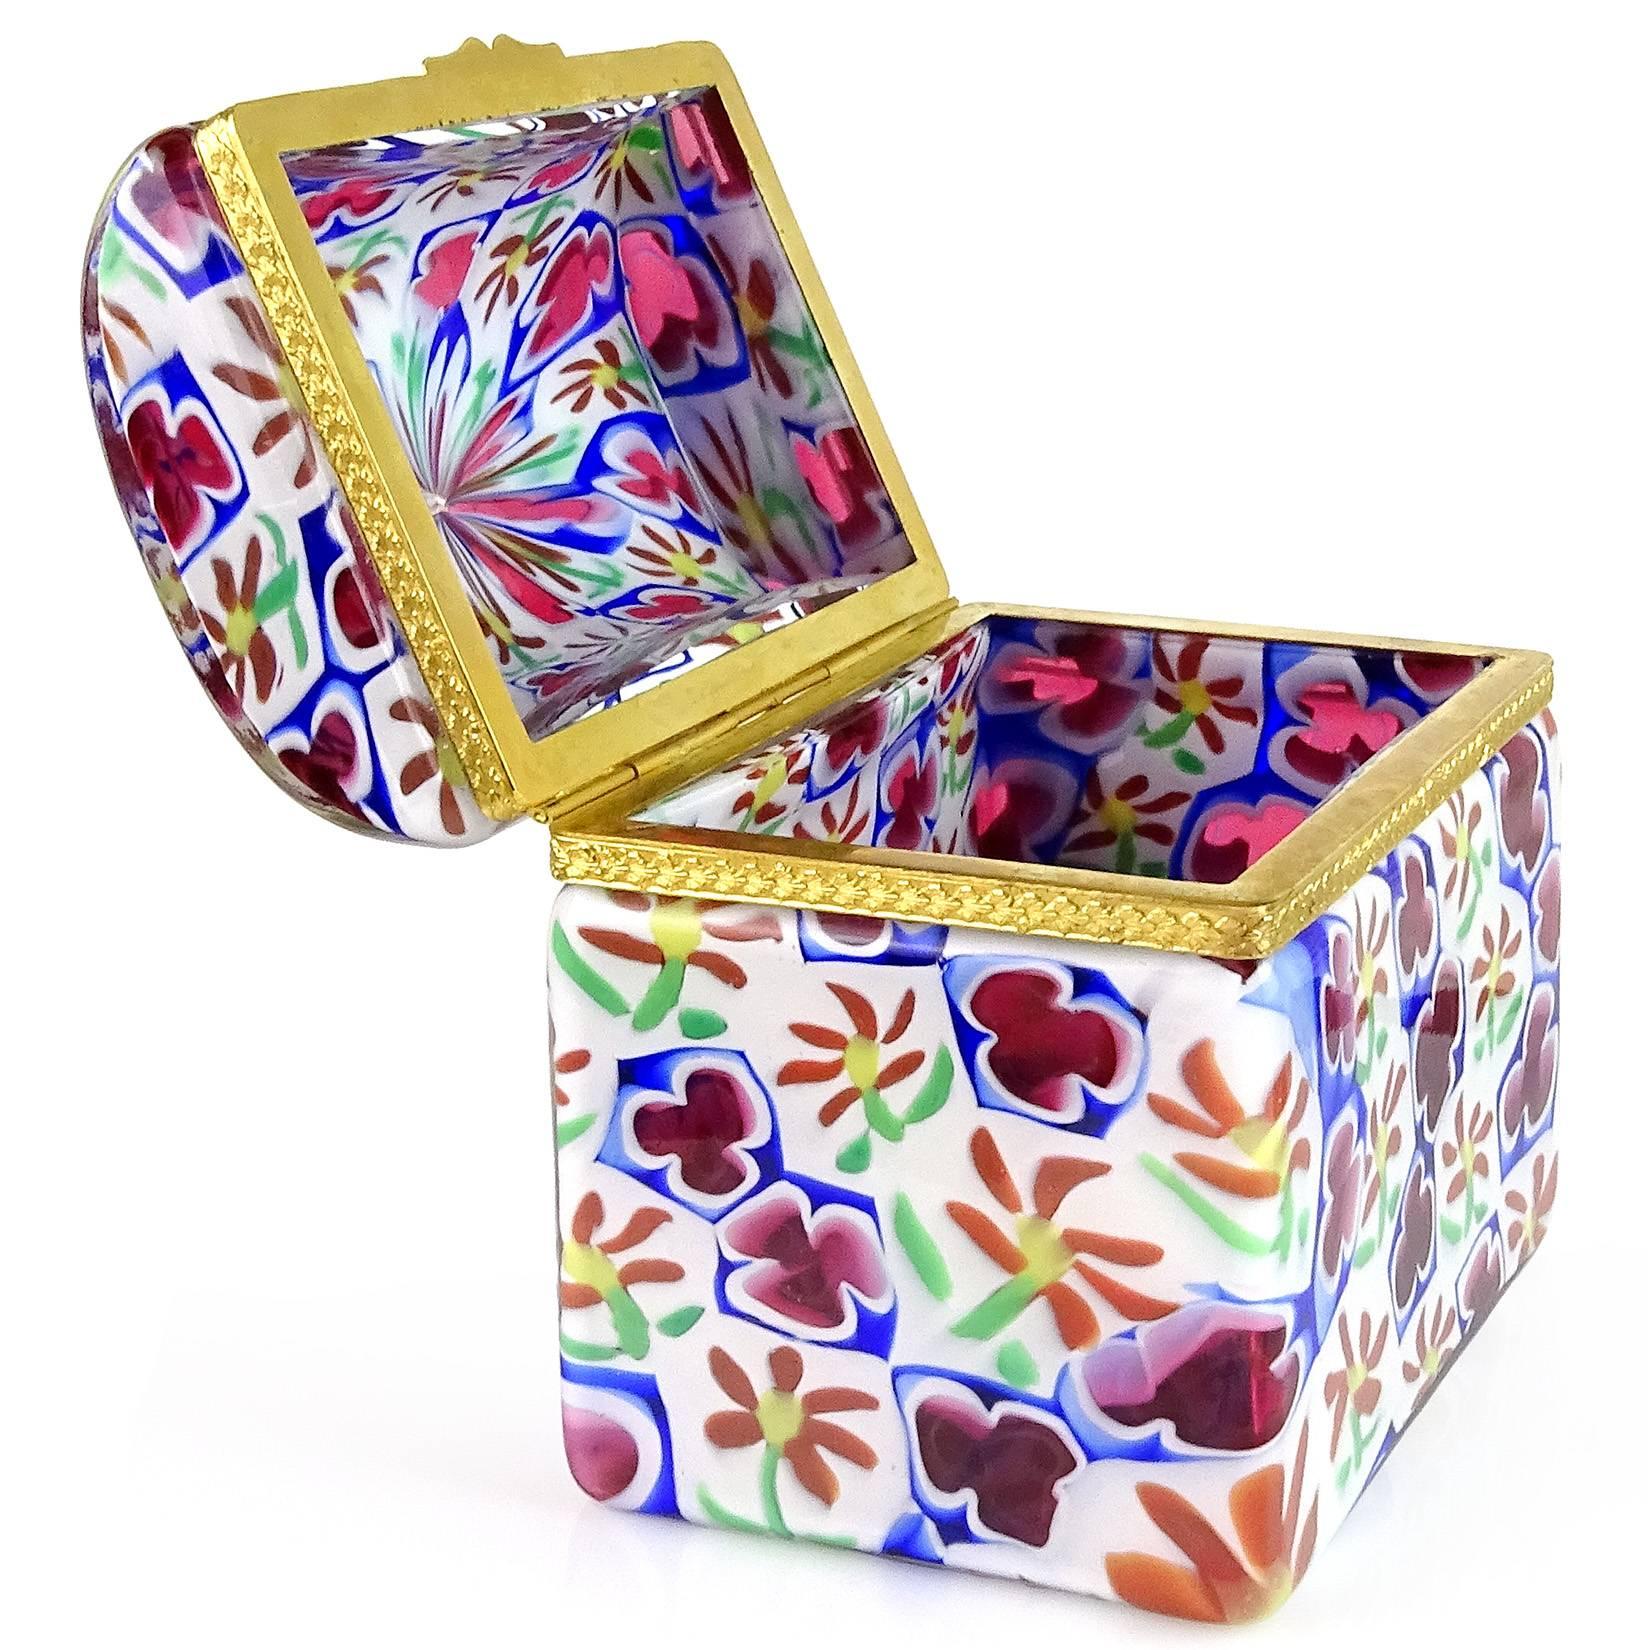 Gorgeous Murano hand blown Millefiori daisy and clover Italian art glass casket jewelry box. Documented to the Fratelli Toso company. It has a treasure chest / trunk shape. The mosaic design has white, orange, green, purple / pink and cobalt blue